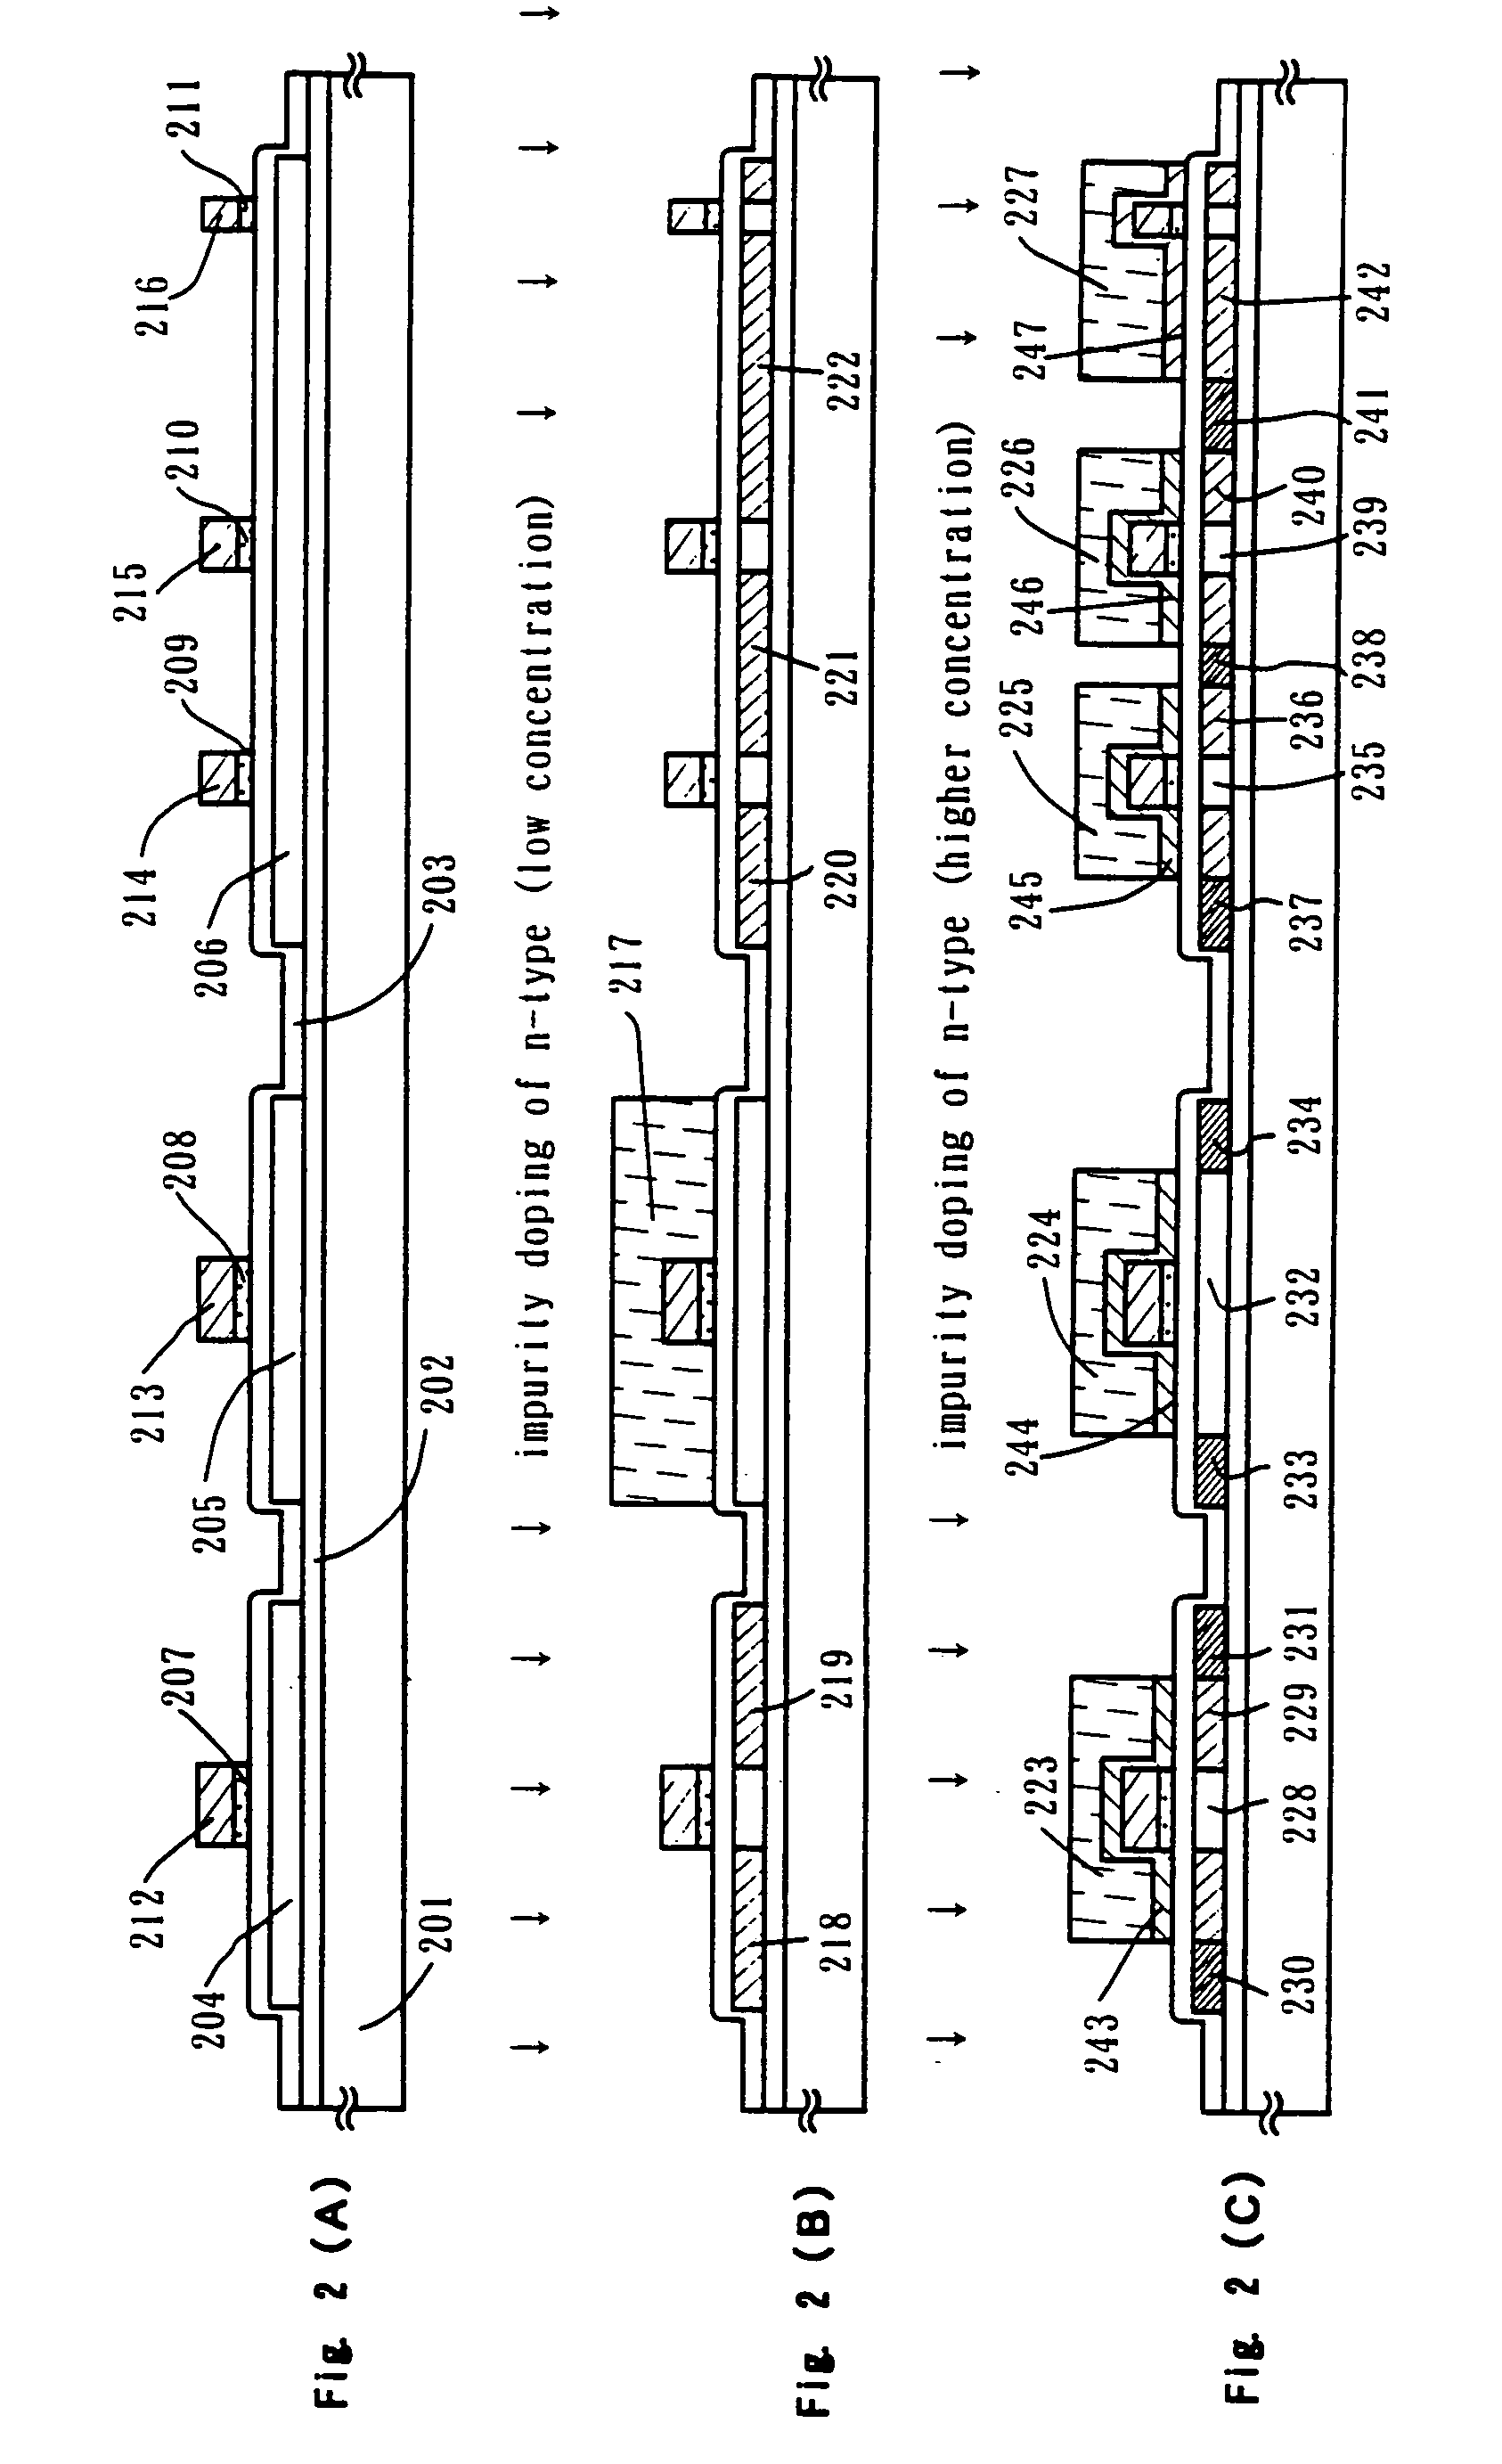 Method of manufacturing semiconductor devices